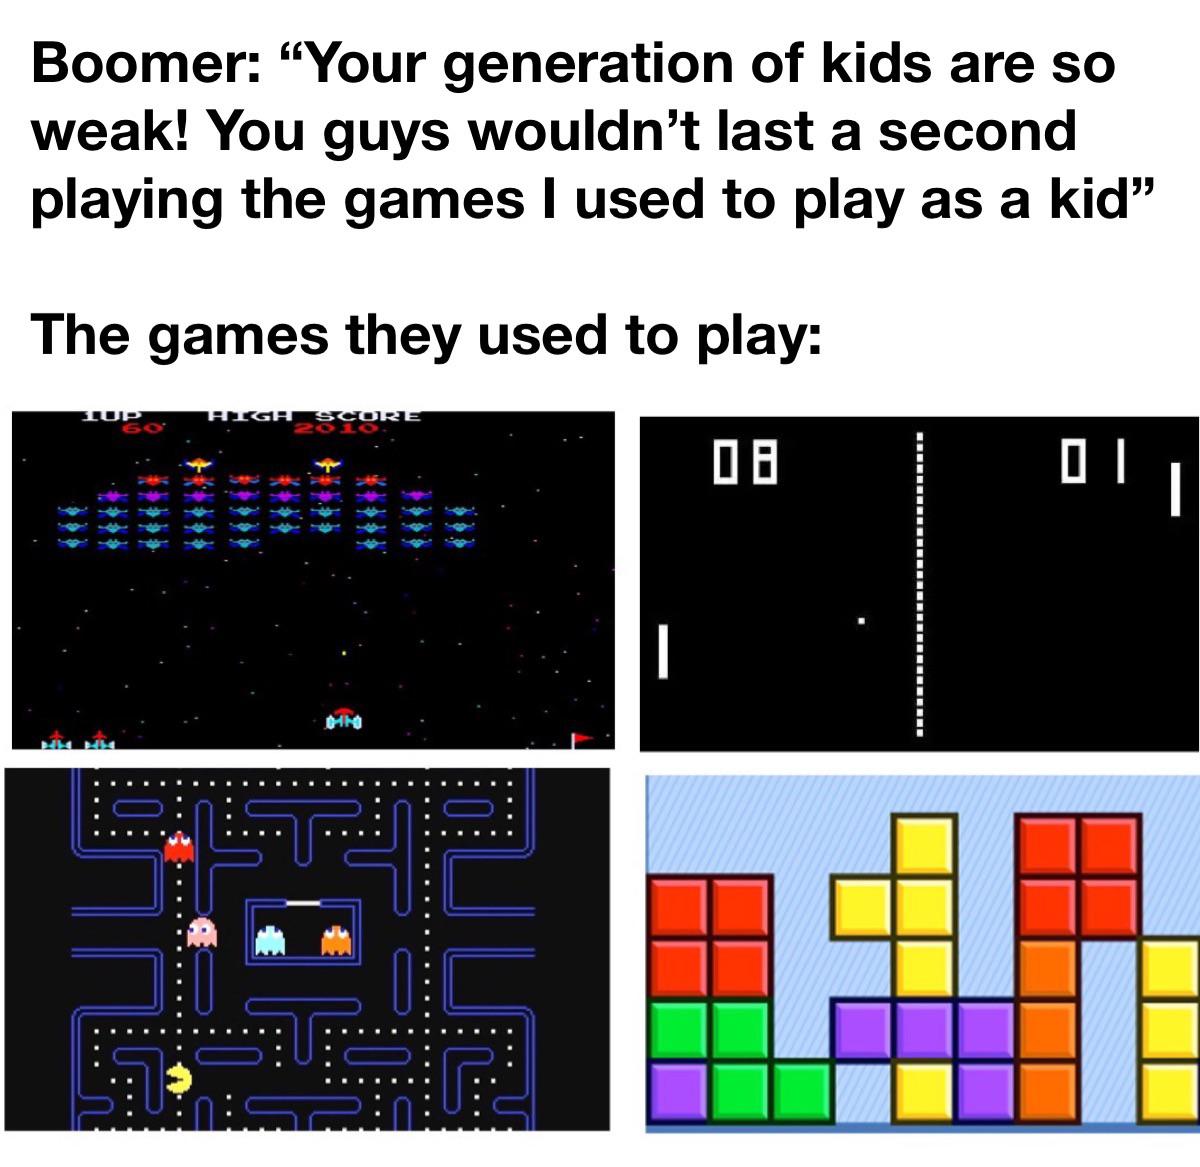 funny memes - angle - Boomer "Your generation of kids are so weak! You guys wouldn't last a second playing the games I used to play as a kid The games they used to play 08 1UP 60 High Score 2010 E |